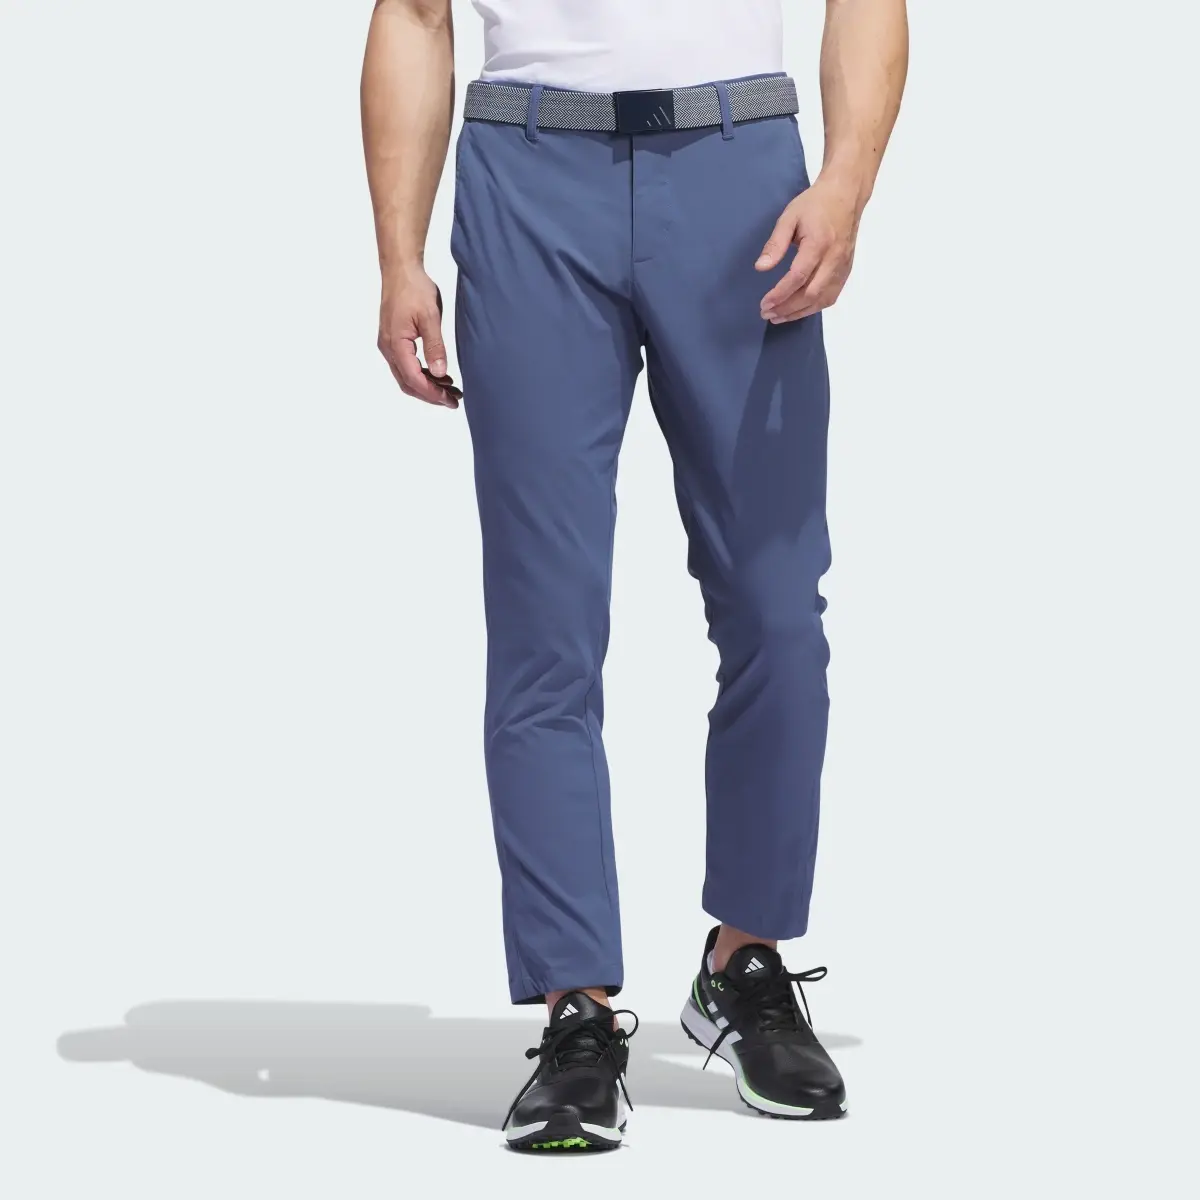 Adidas Ultimate365 Chino Trousers. 1